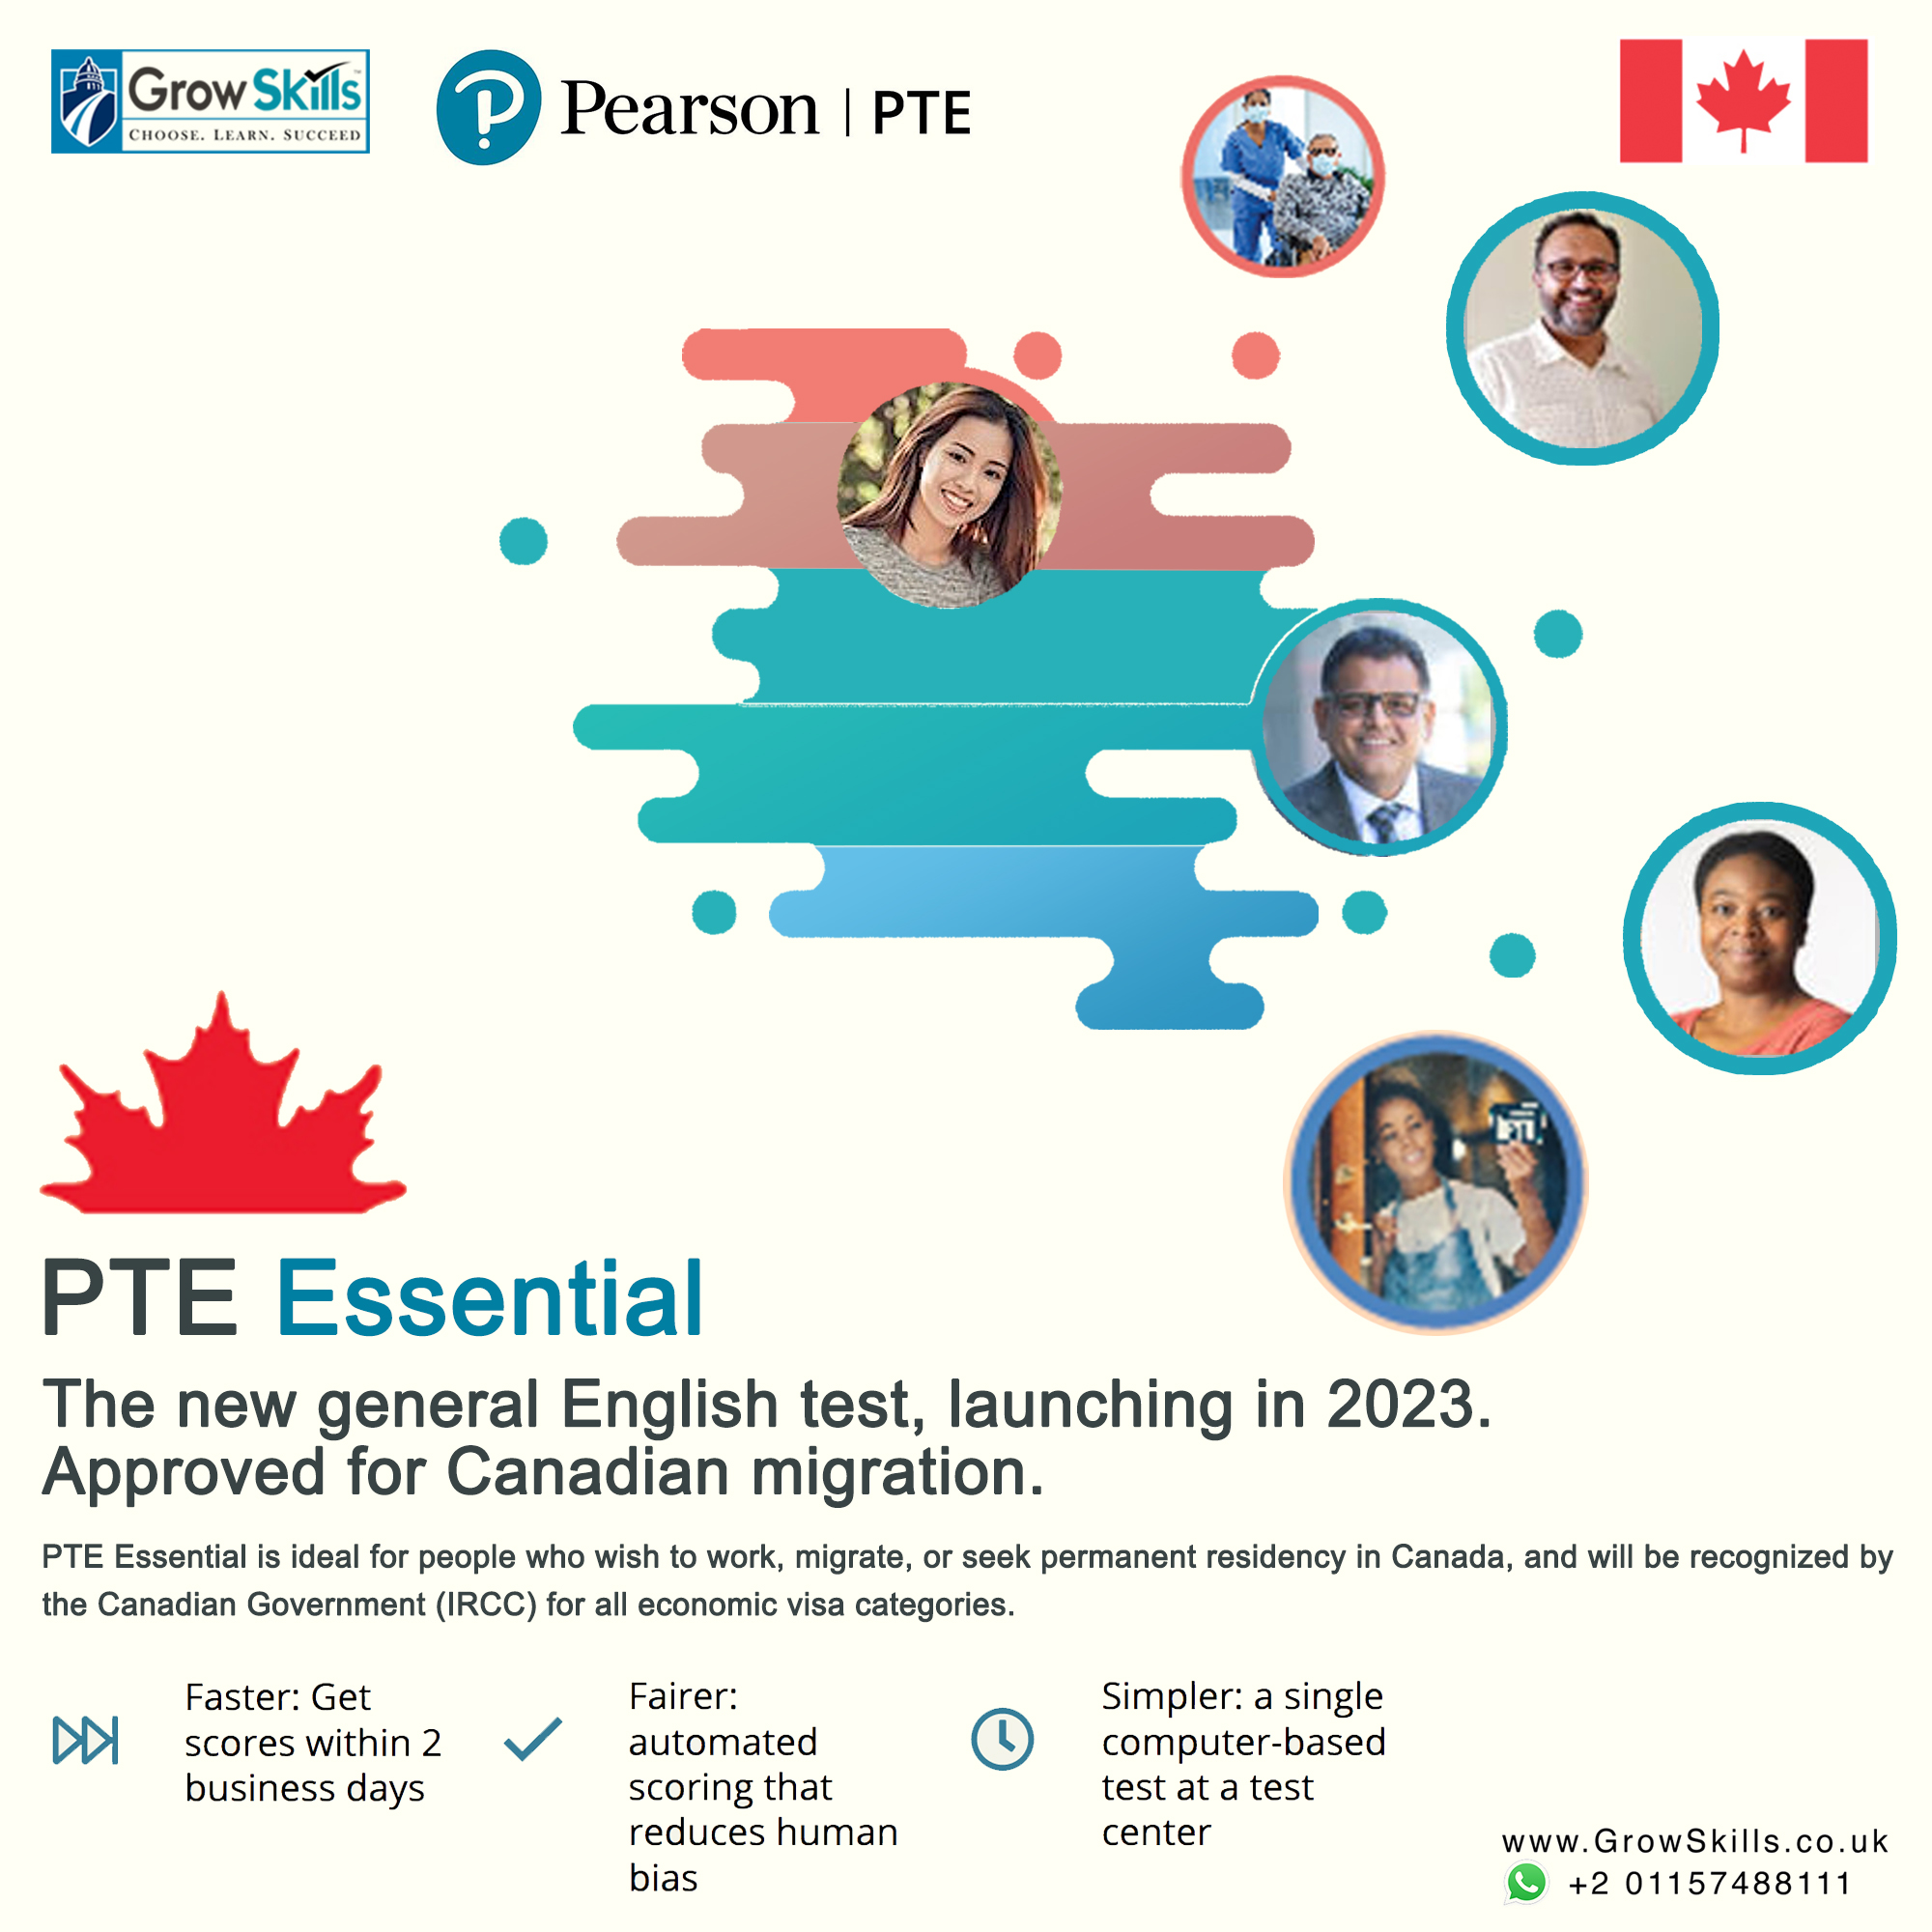 PTE Essential, the new IRCC-approved general skills test, is set to launch late in 2023.